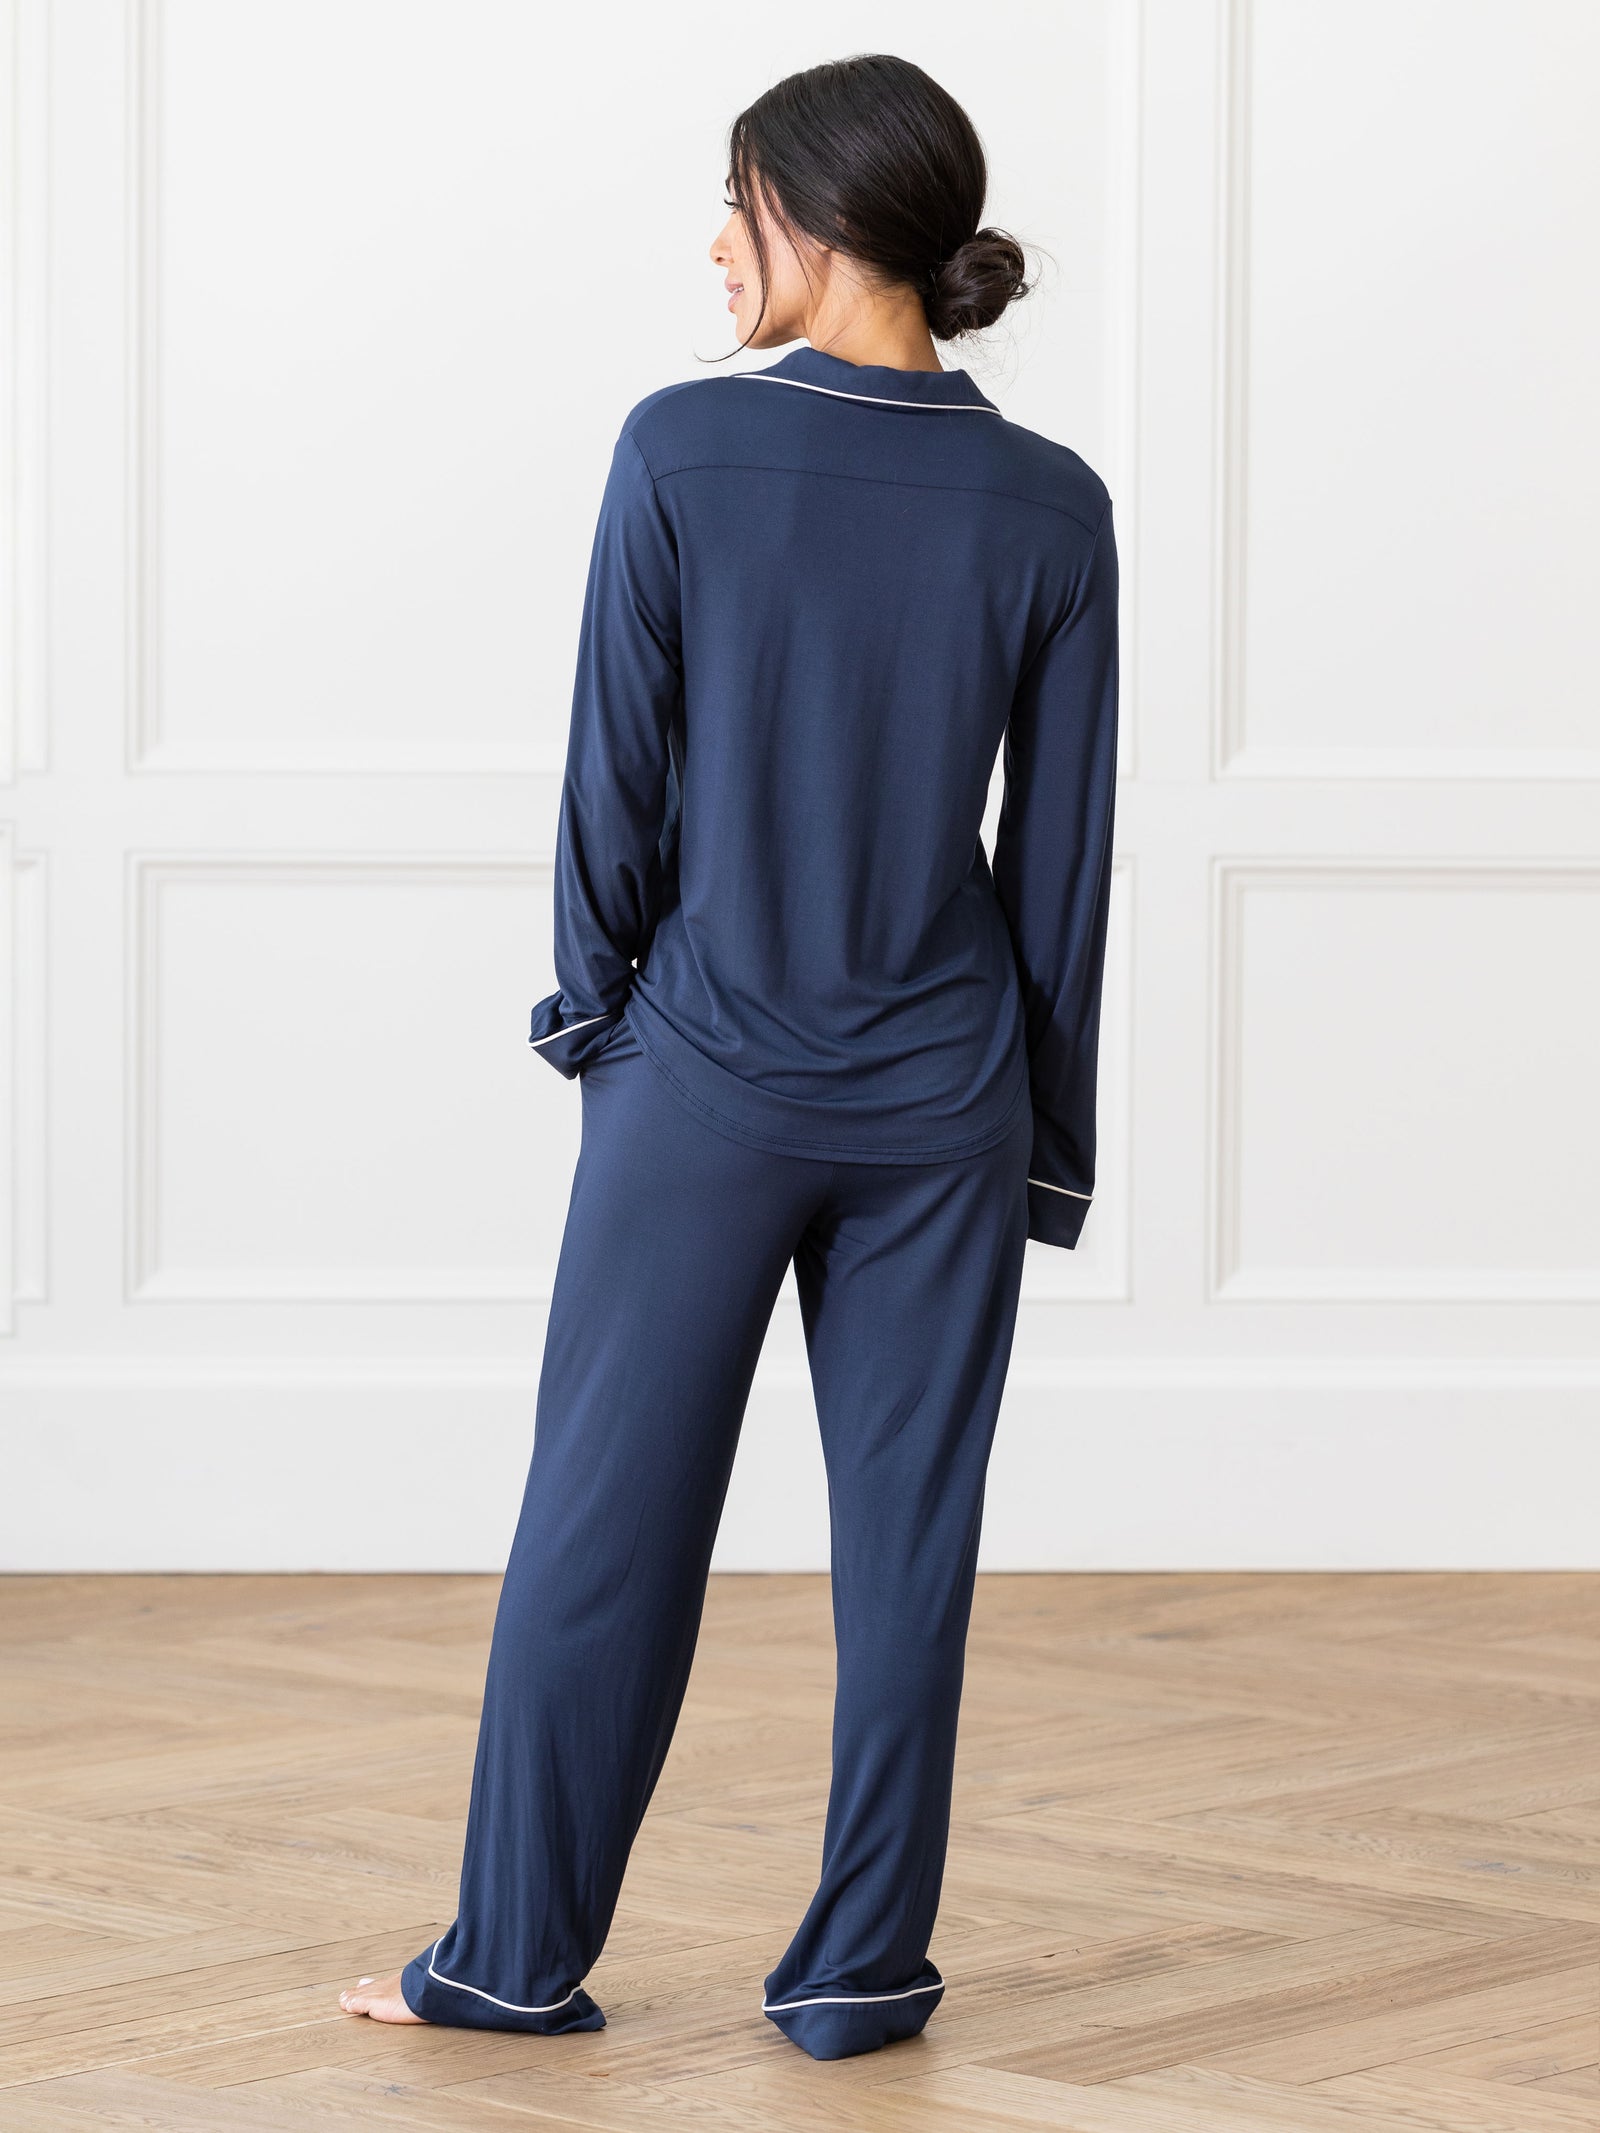 Navy Long Sleeve Pajama Set modeled by a woman. The photo was taken in a high contrast setting, showing off the colors and lines of the pajamas. 